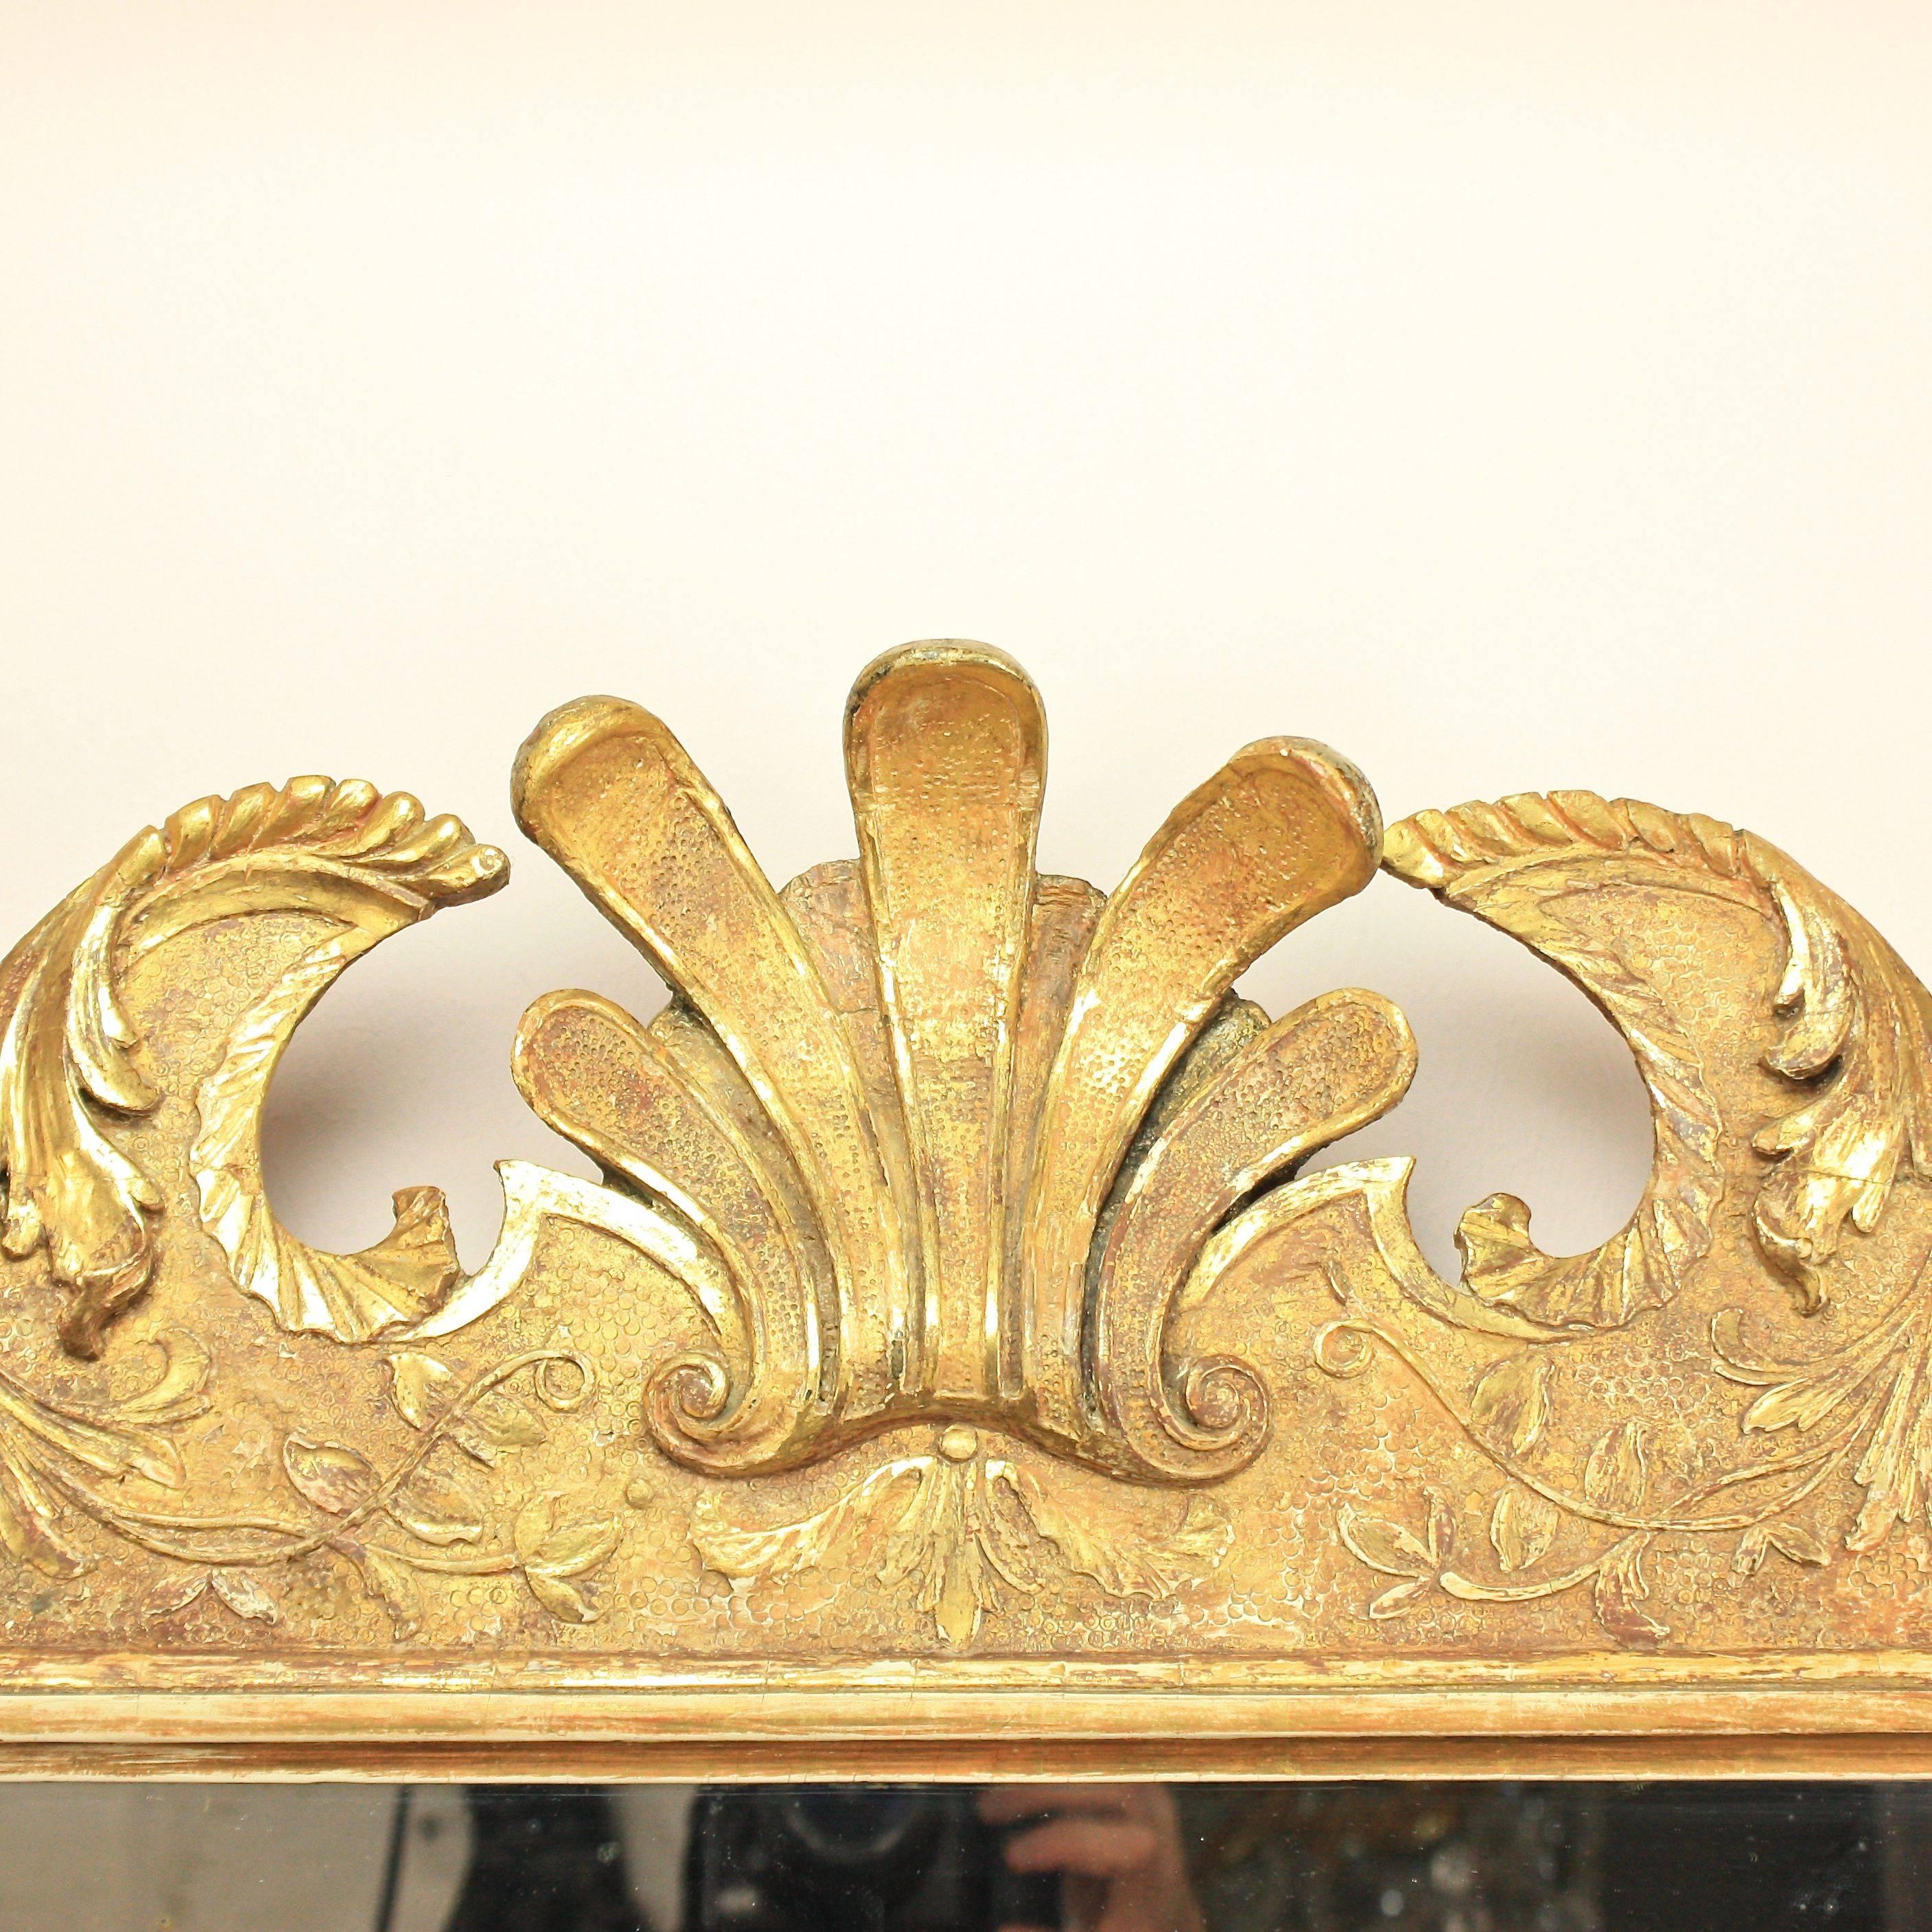 Early 18th century George I giltwood pier mirror in the manner of James Moore (circa 1670-October 1726) and John Gumley (circa 1670–19 December 1728). A mirror similar in design and seize is currently on display at Beningbrough Hall, North